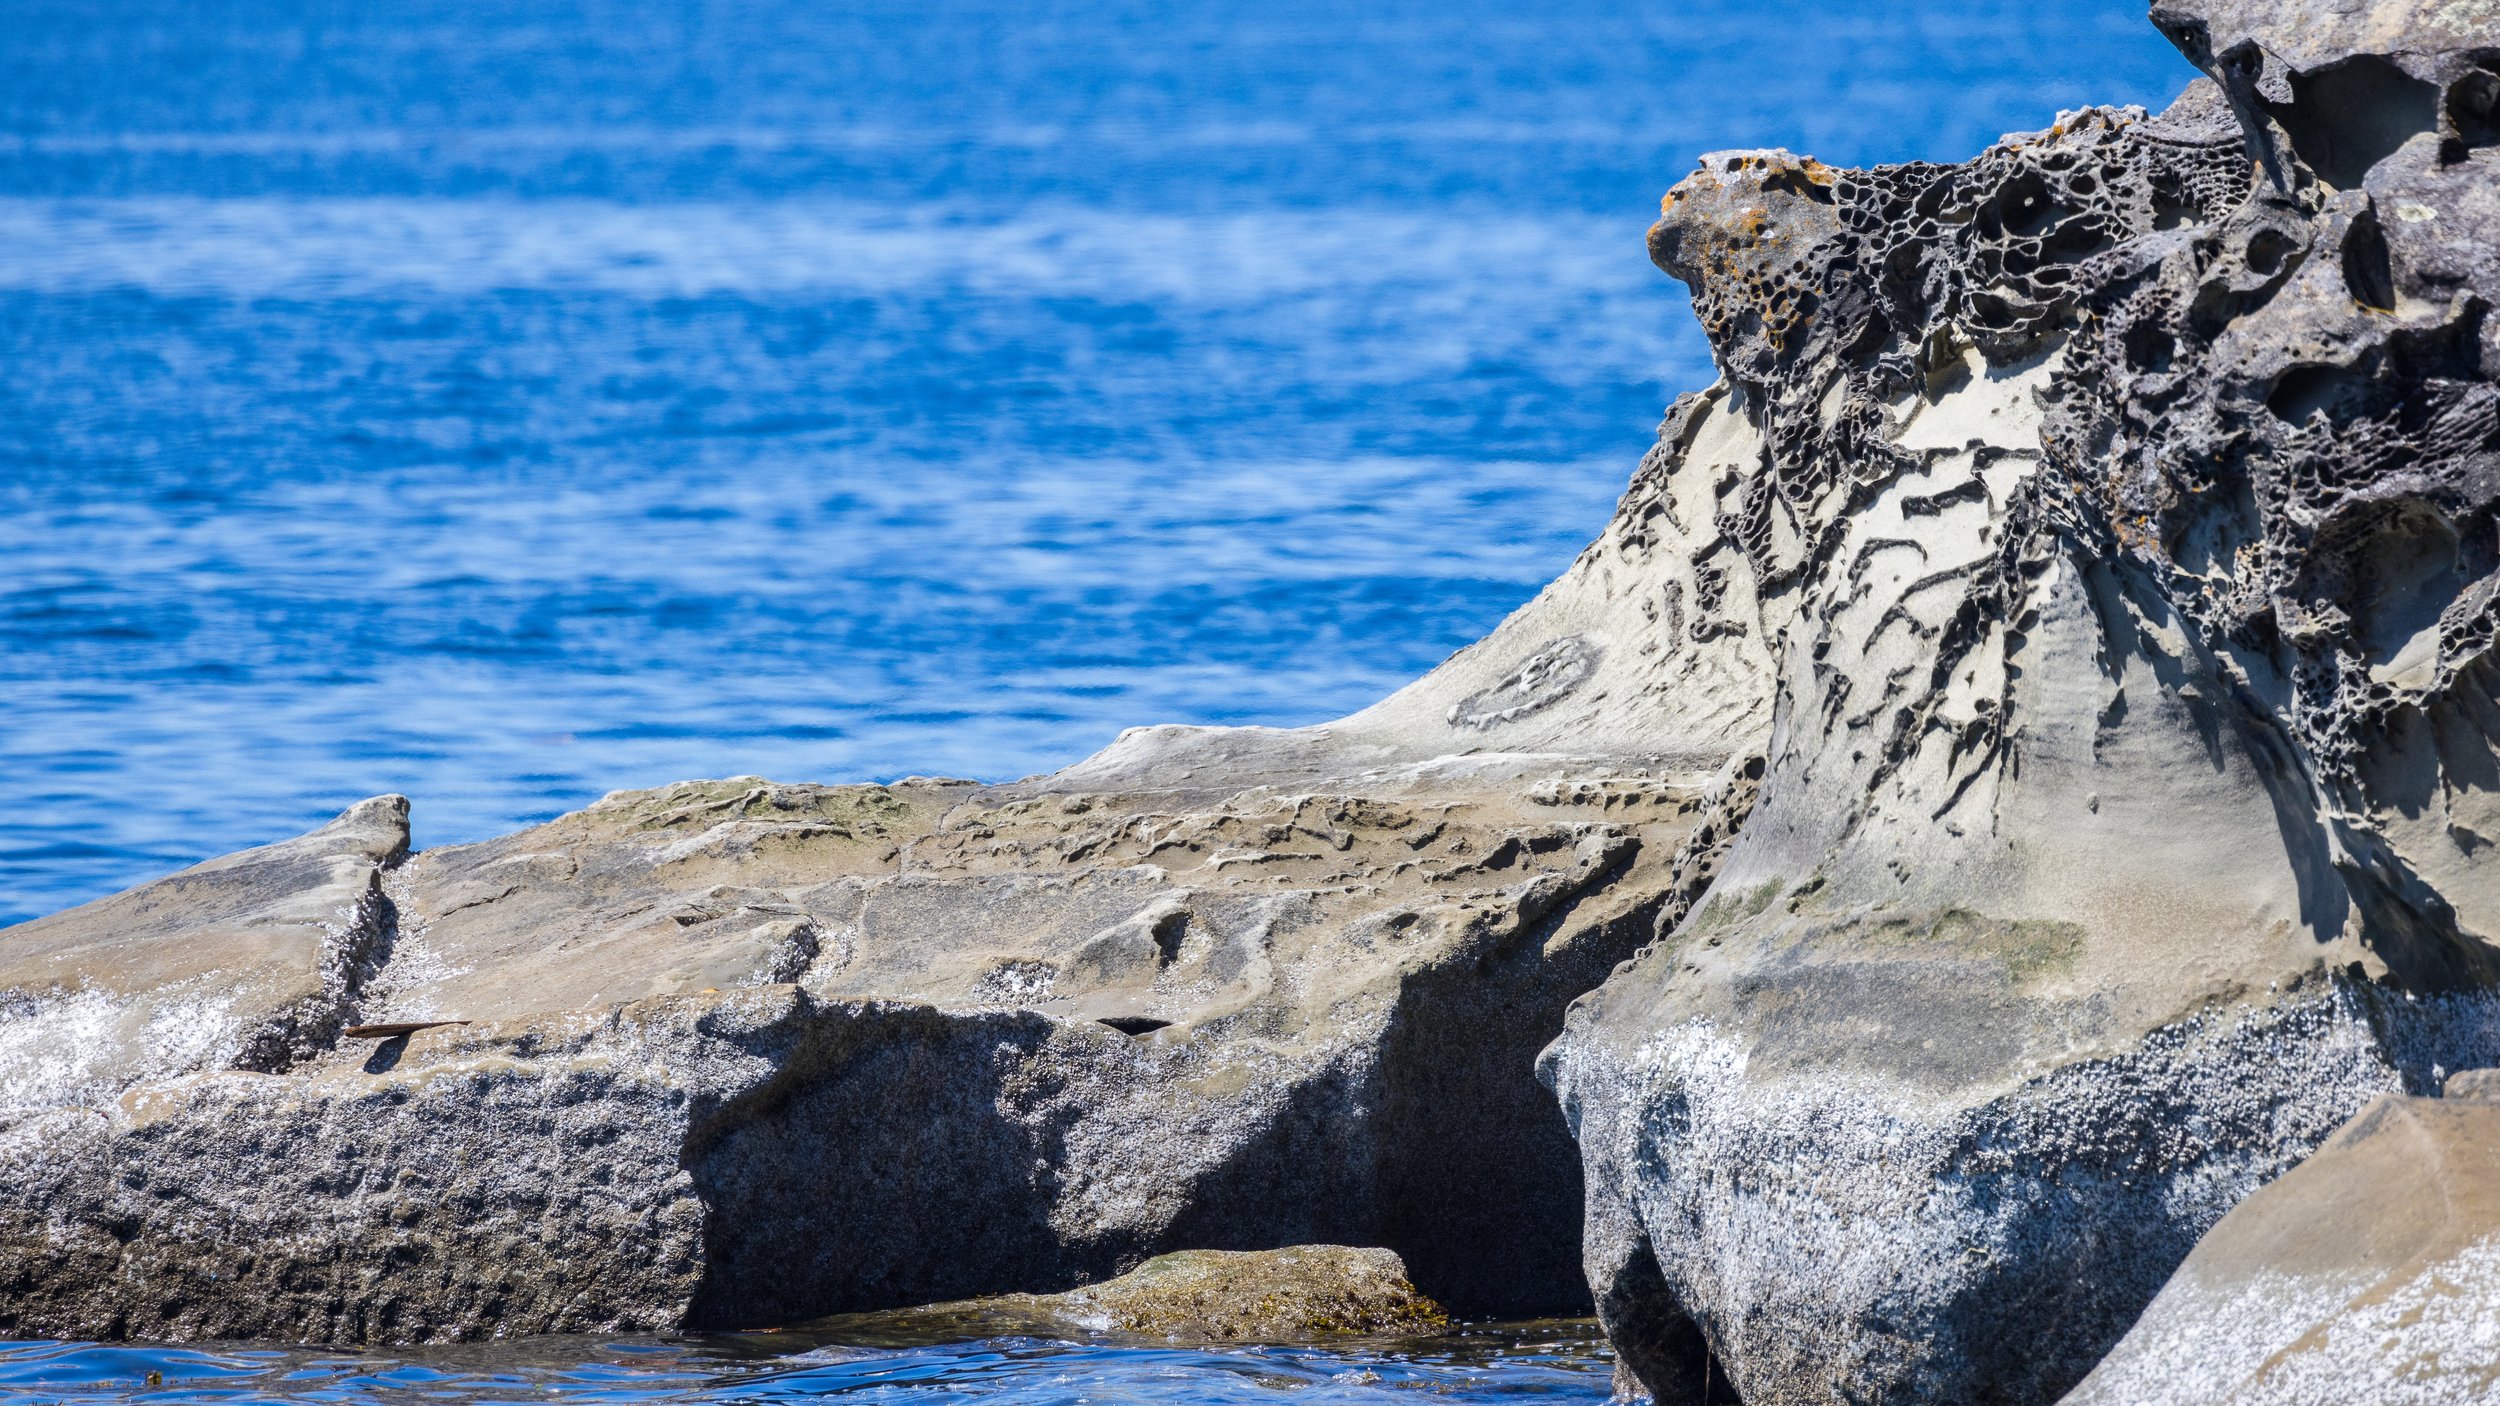  The rugged sandstone features along the water on Galiano always make for interesting subjects. 